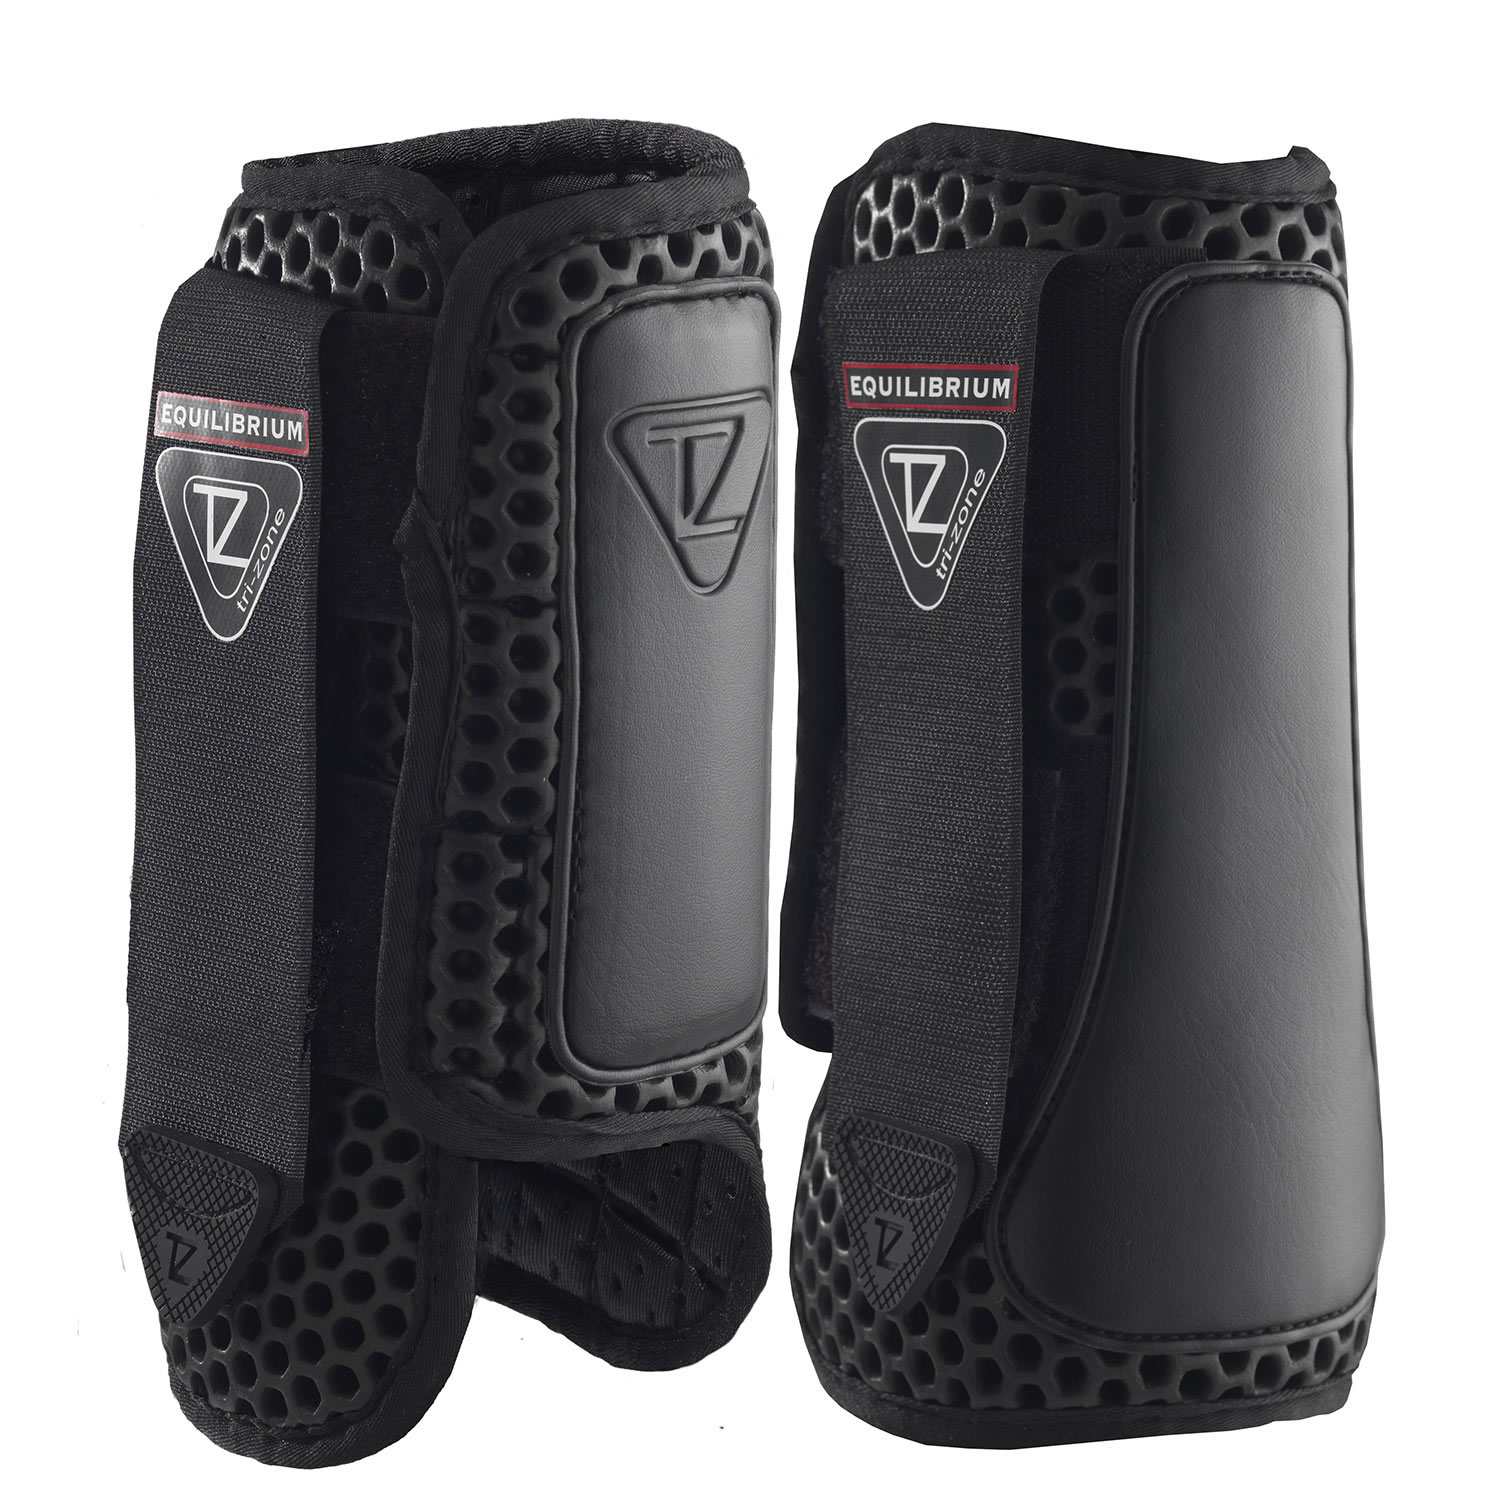 EQUILIBRIUM TRI-ZONE IMPACT SPORTS BOOTS BLACK FRONT SMALL FRONT SMALL FRONT